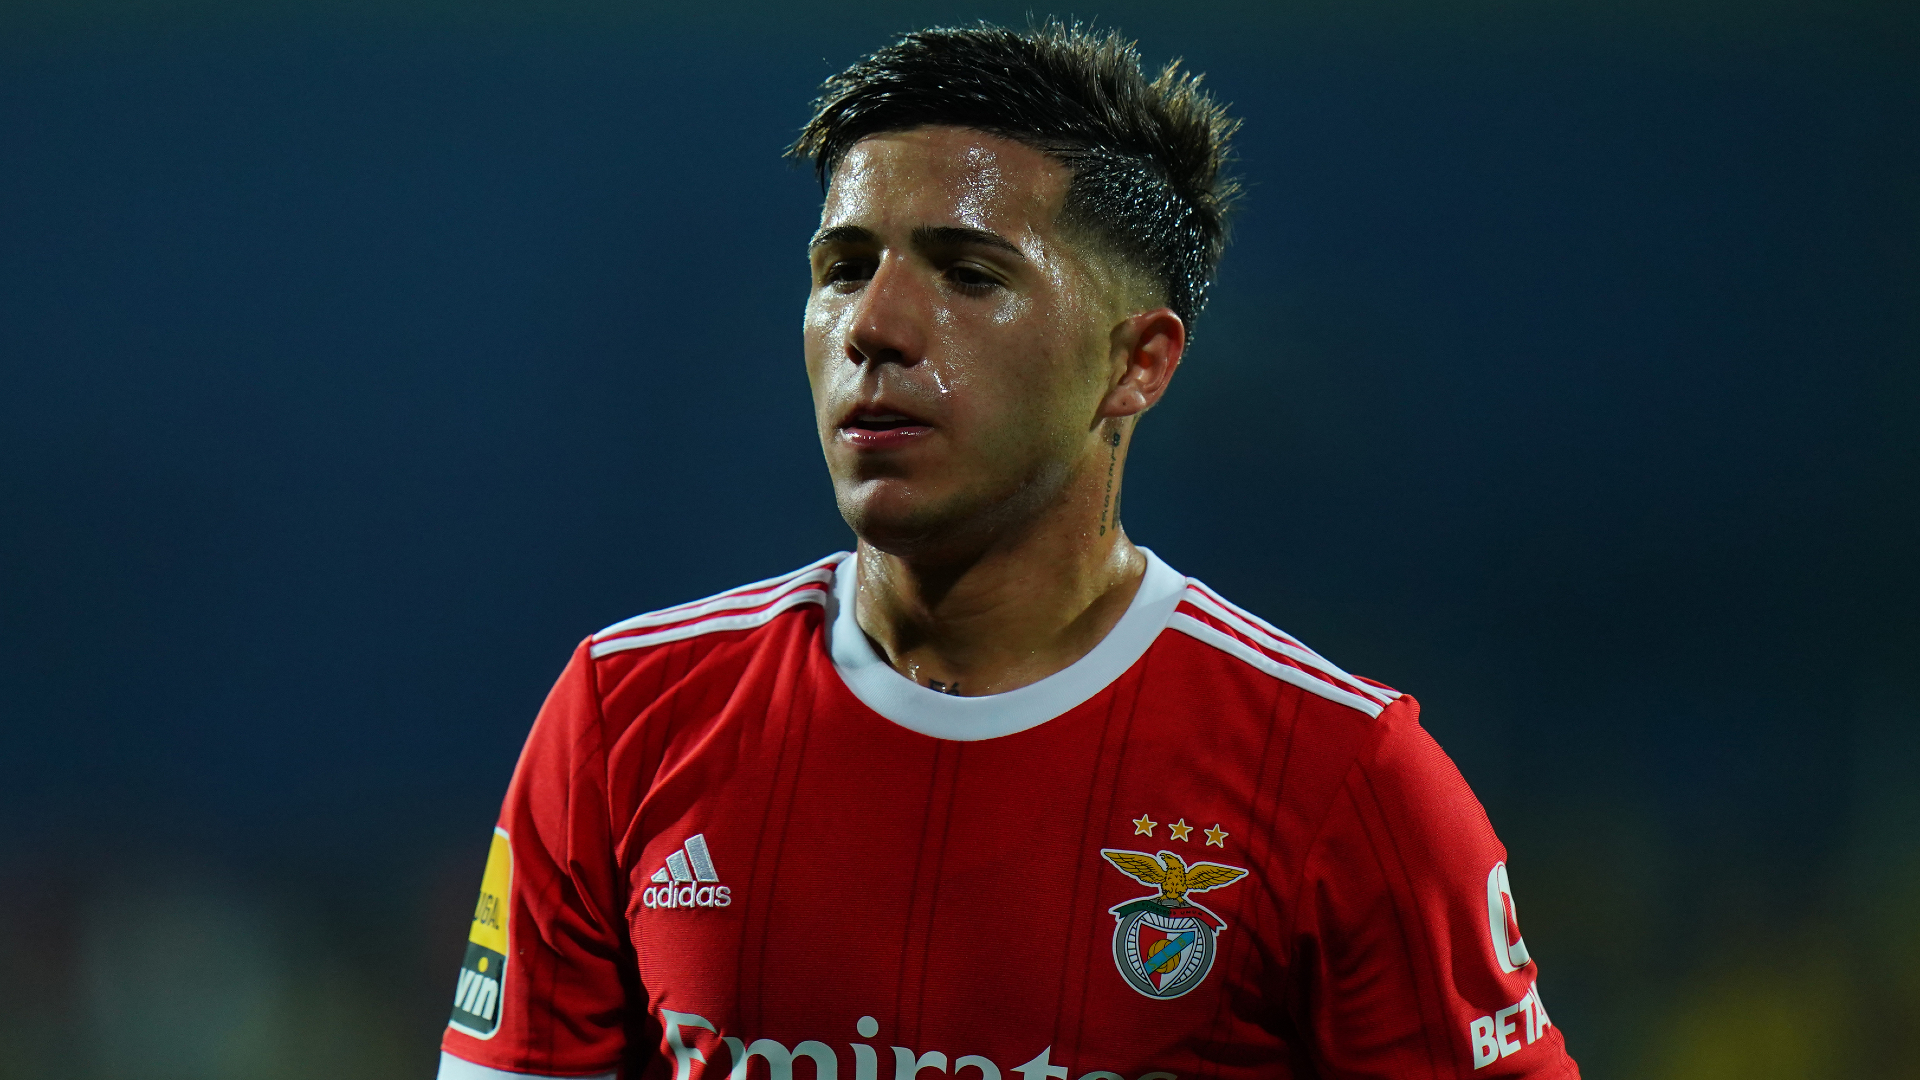 Schmidt expects Chelsea target Fernandez to stay at Benfica